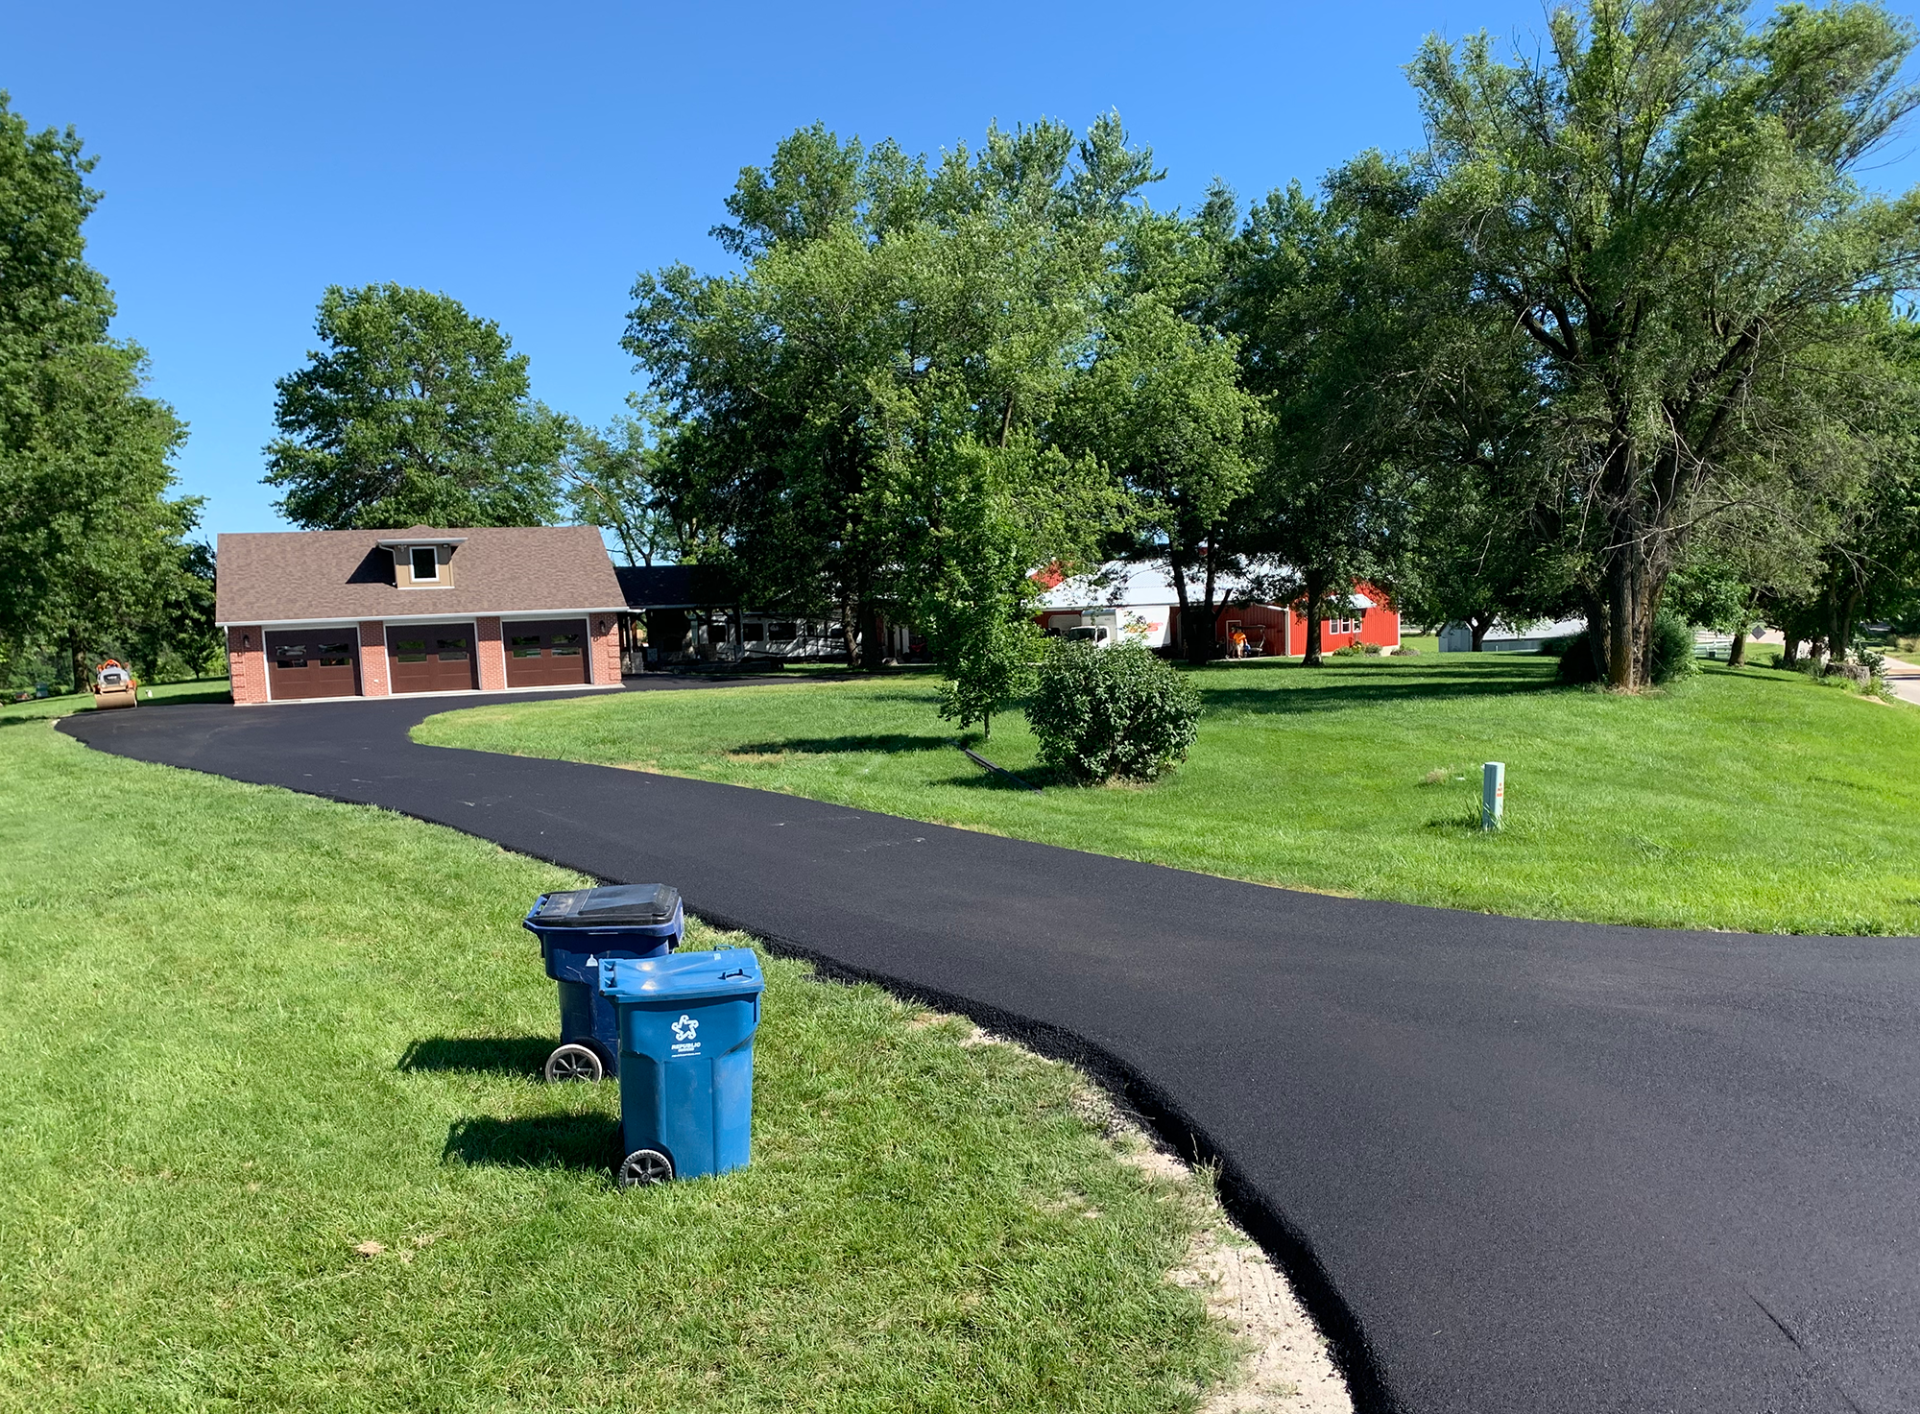 When You Need Residential Asphalt Paving, Contact MoSEAL in Fulton, MO. Get Your Free Quote Today.